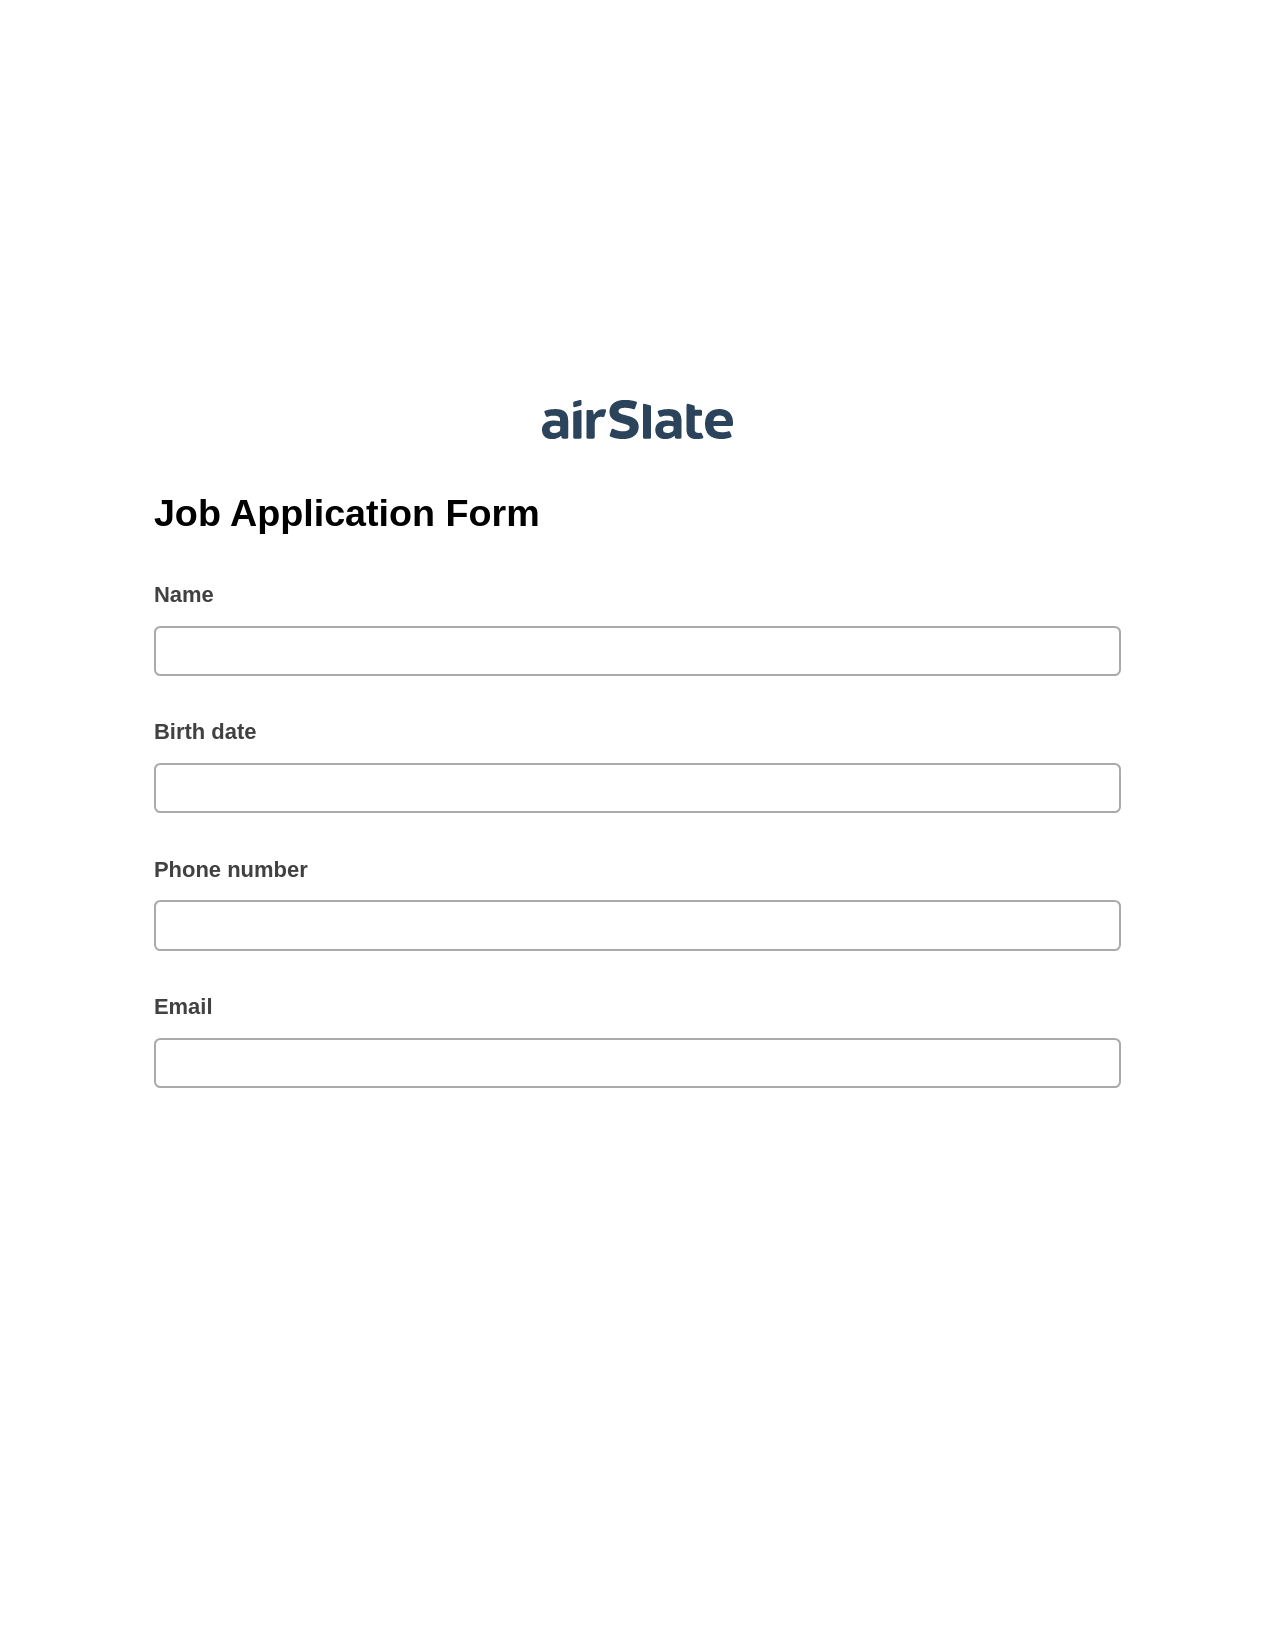 Multirole Job Application Form Pre-fill from Smartsheet Bot, Pre-fill with Custom Data Bot, Export to Excel 365 Bot